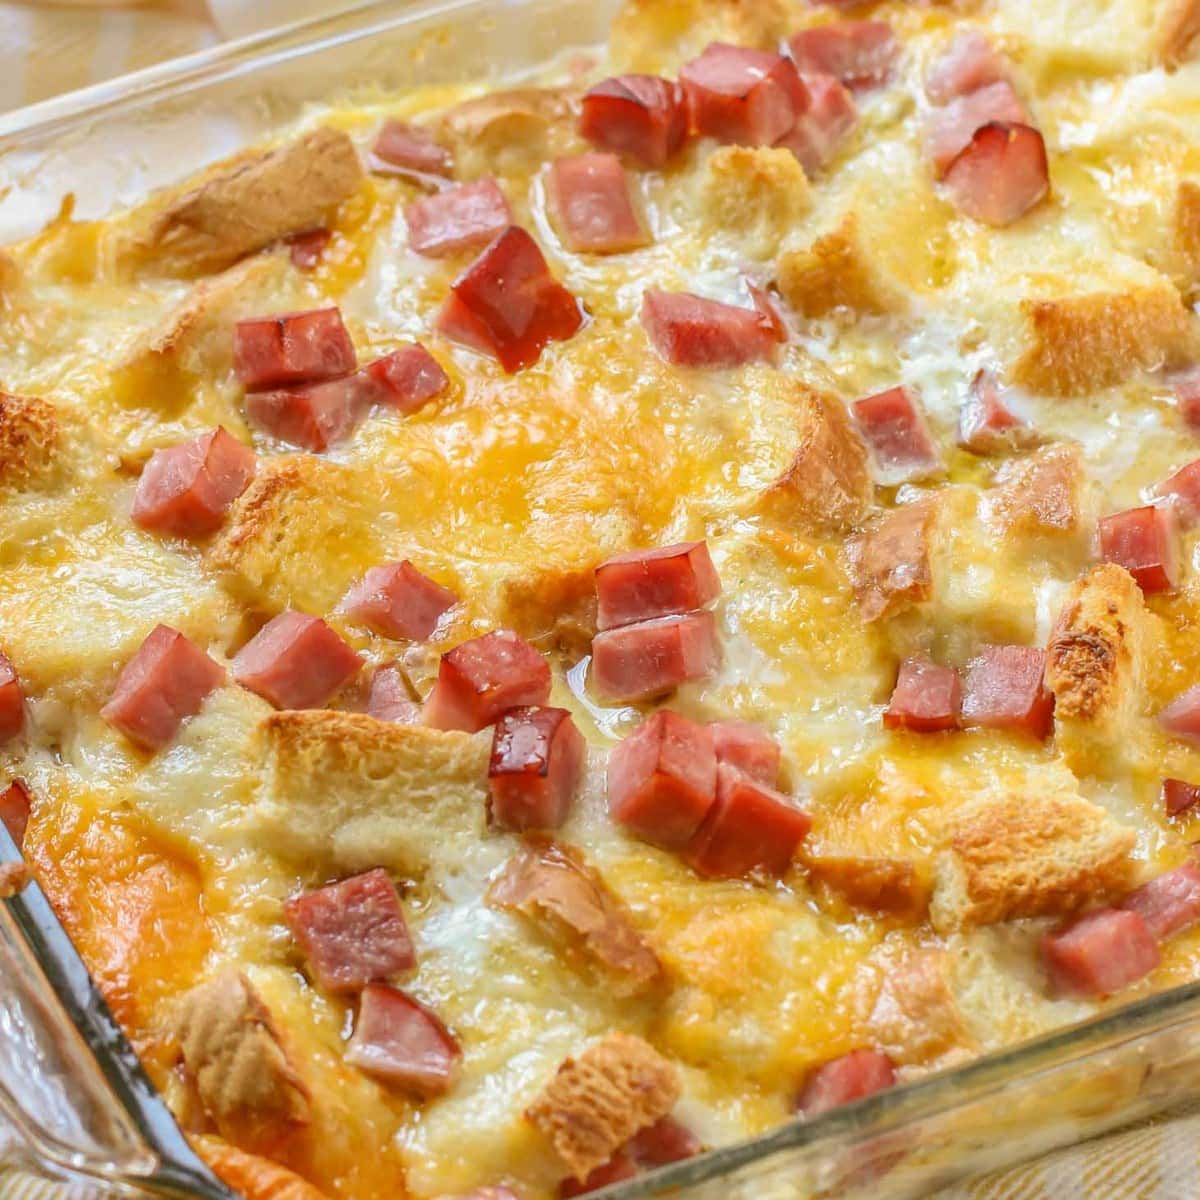 Breakfast Strata in dish - close up image.